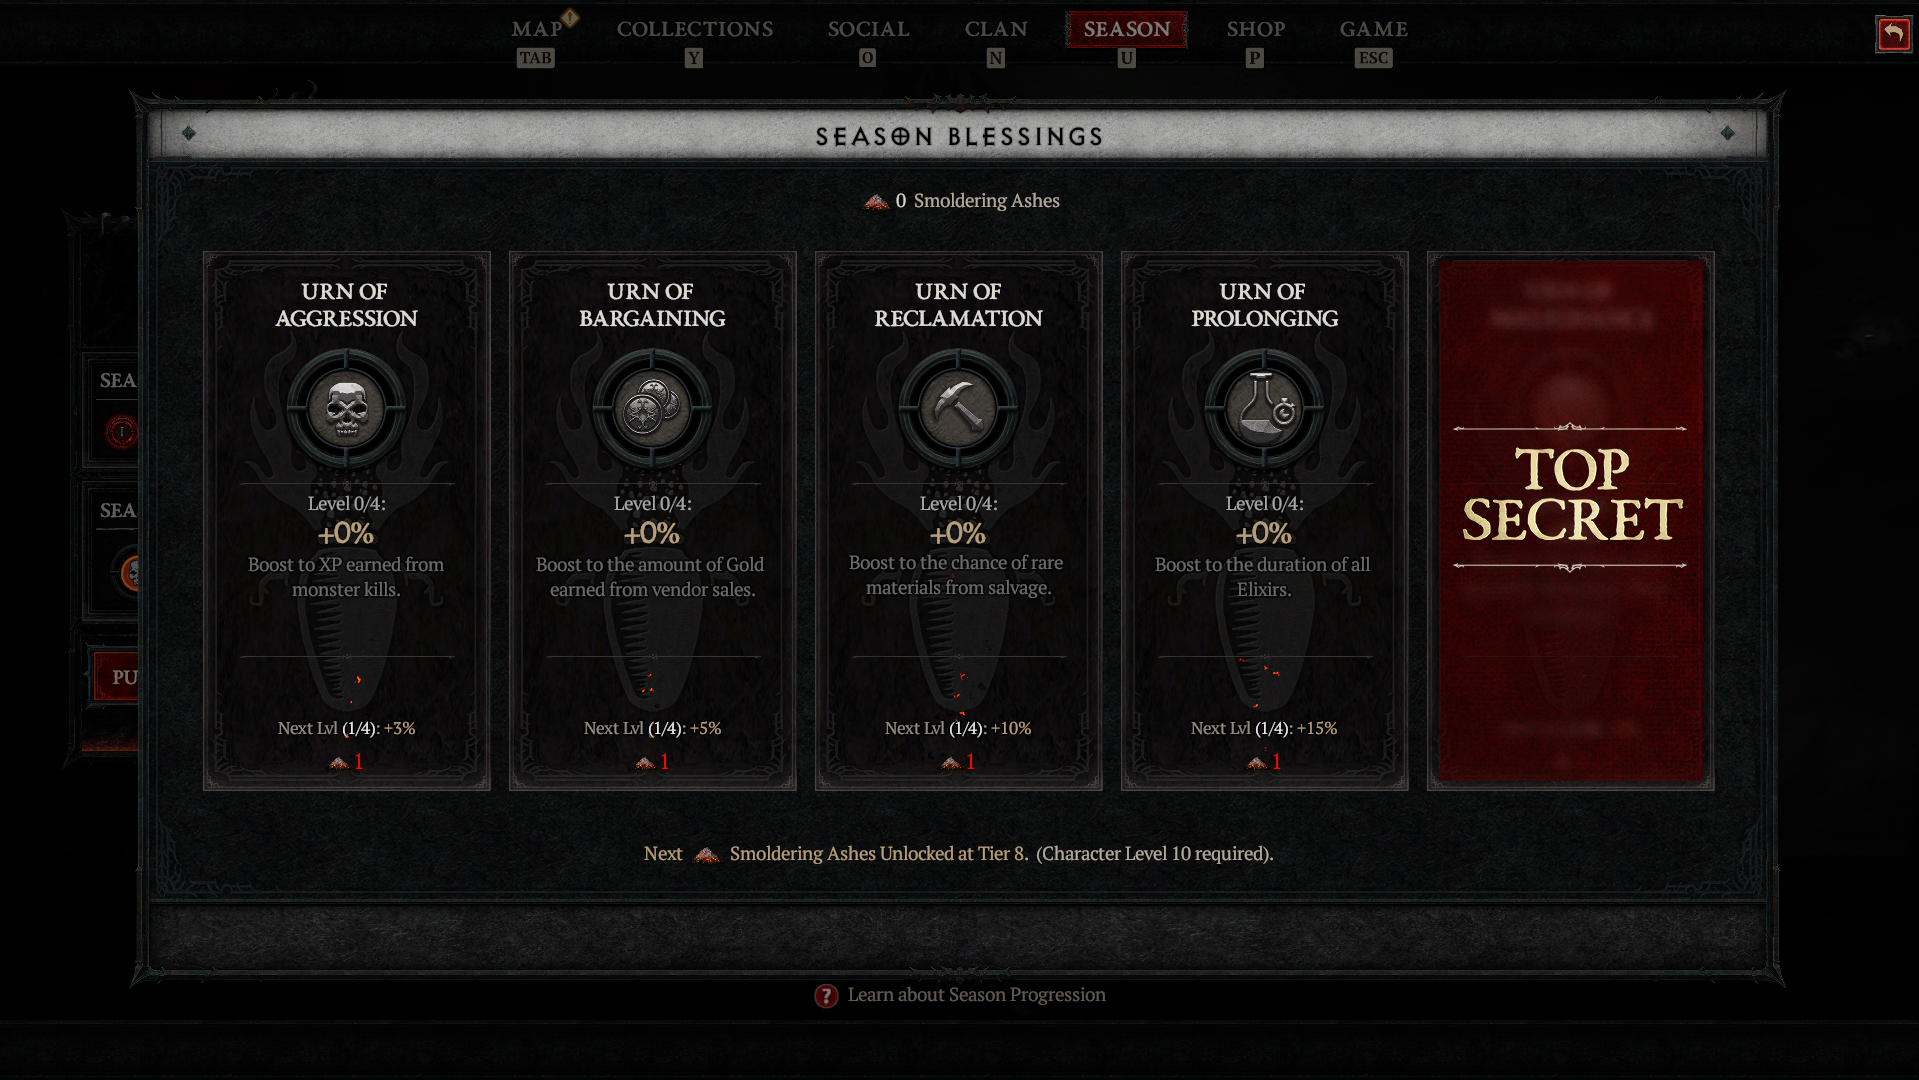 The Diablo 4 Season Blessings screen. Several blessings are displayed in dark boxes with different icons, and the last blessing is obscured by a red film and the words "TOP SECRET."